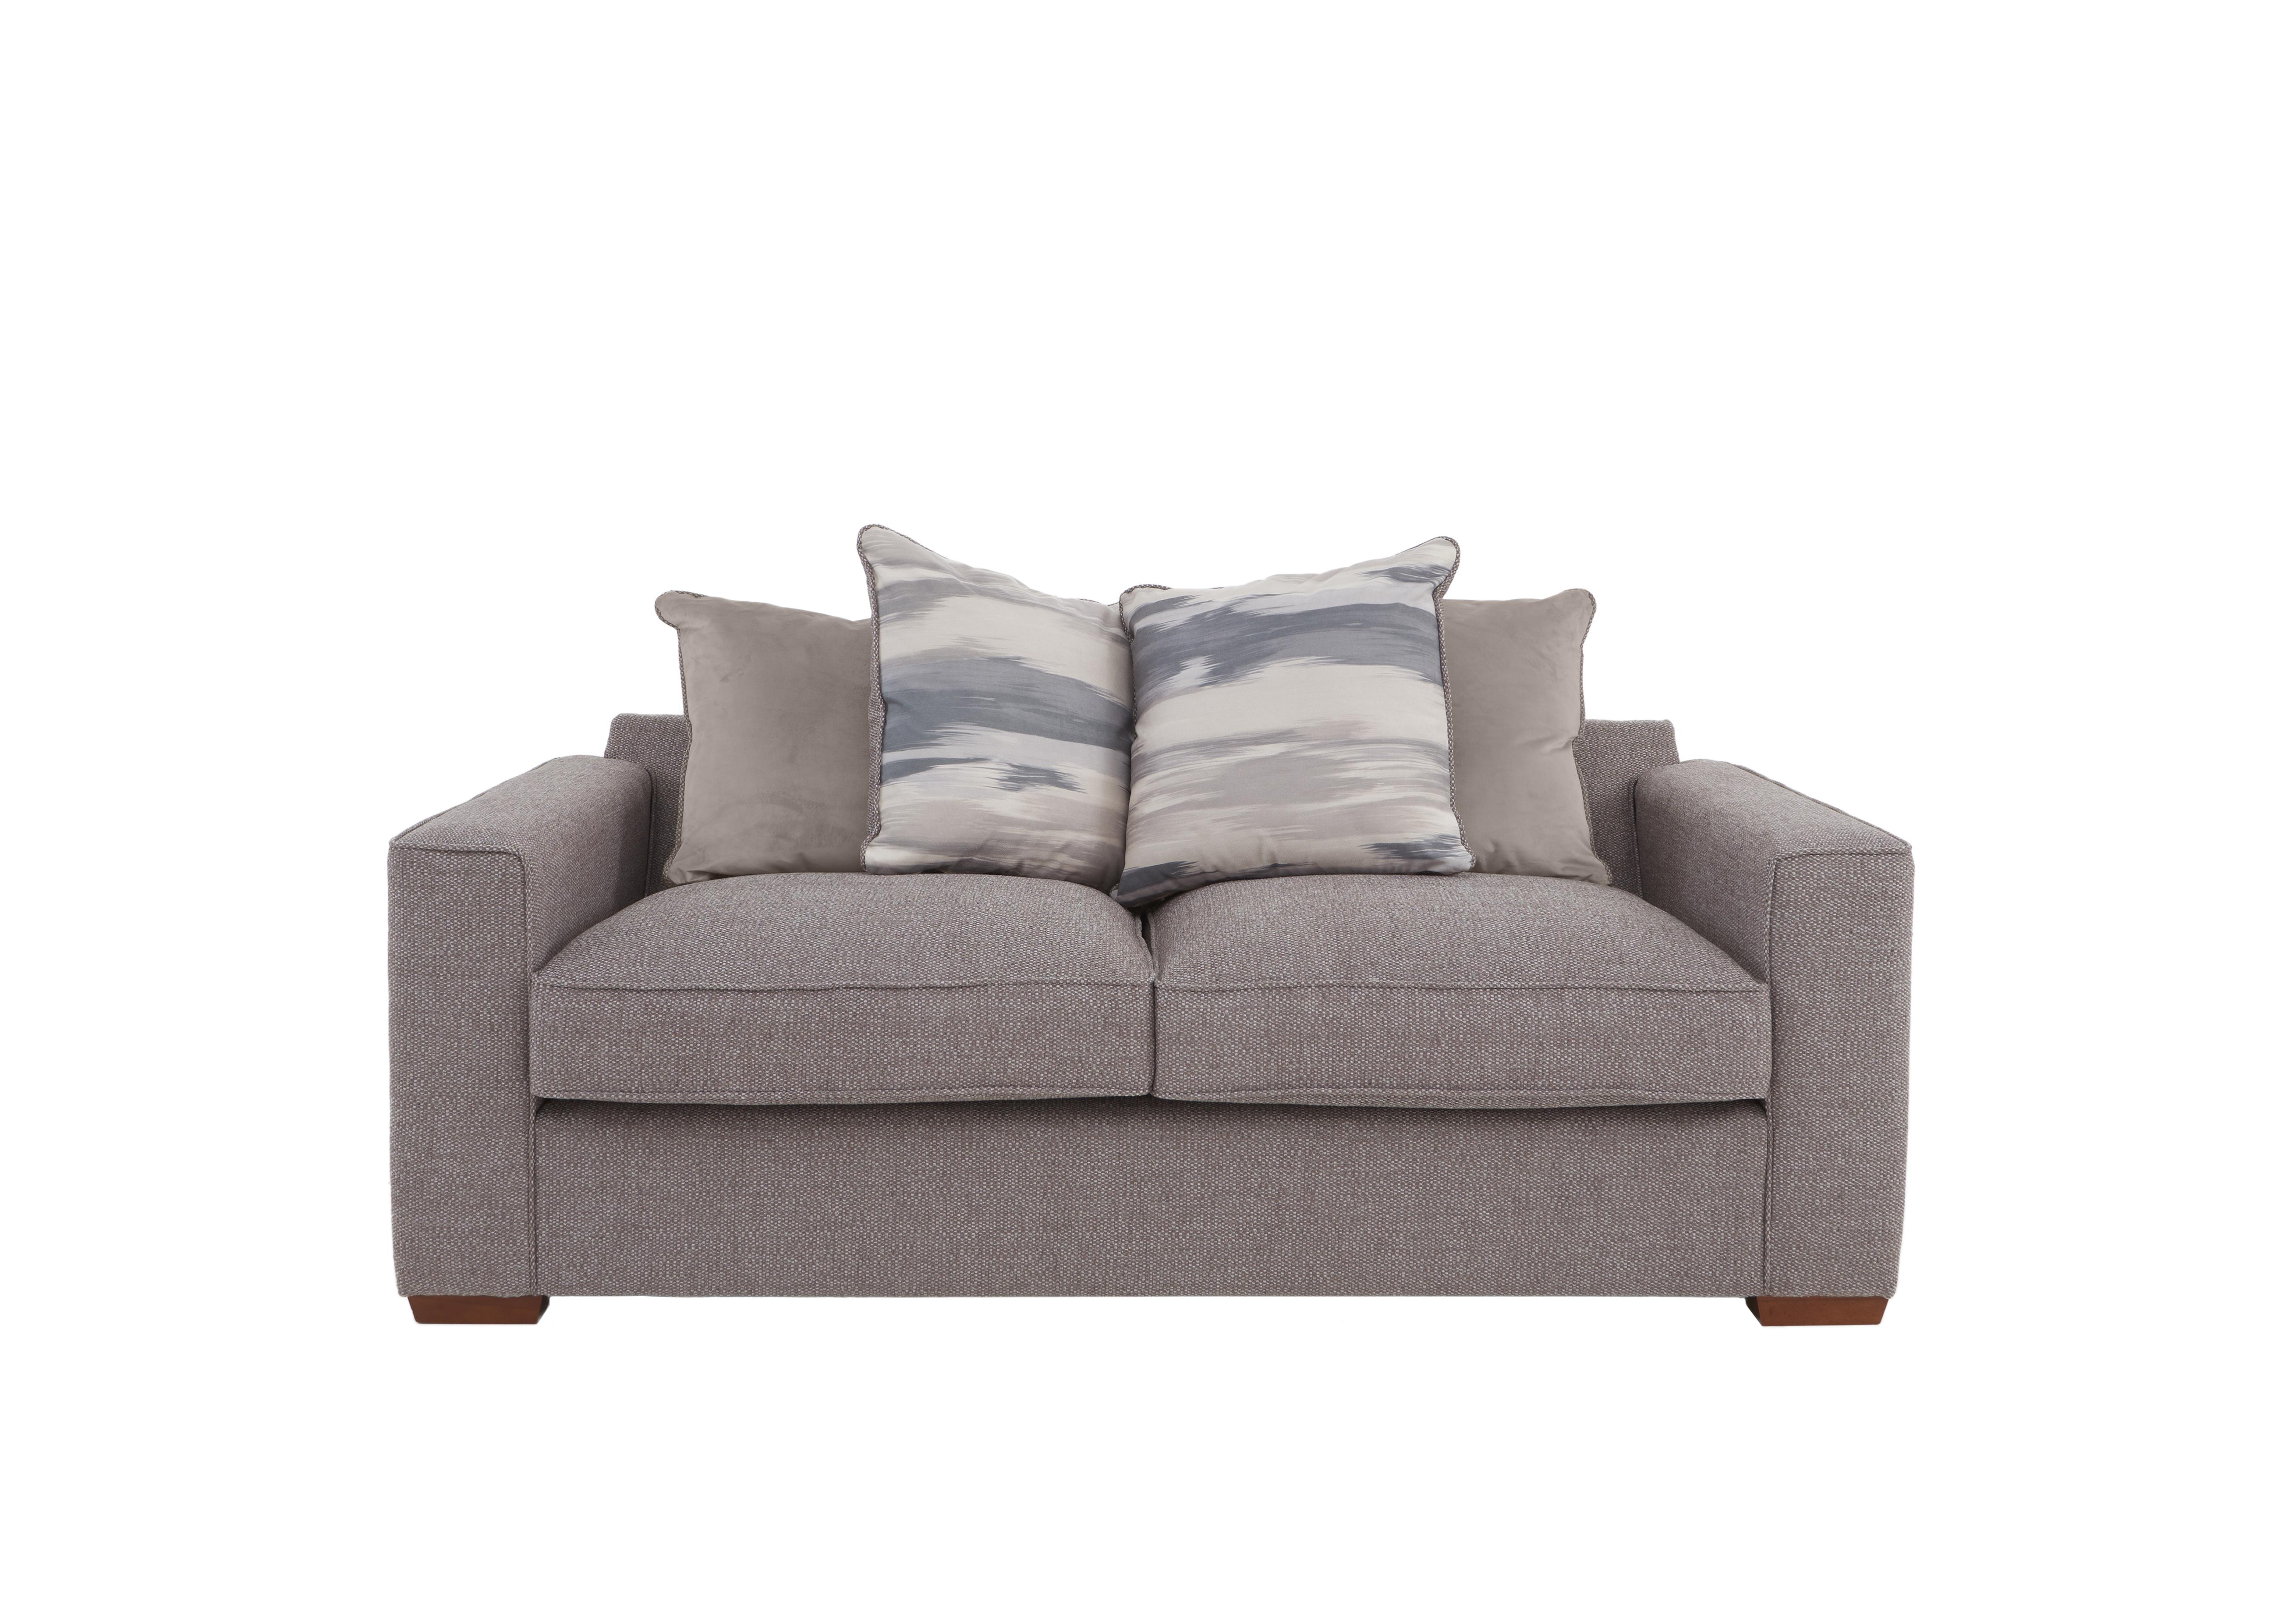 Cory 2 Seater Fabric Scatter Back Sofa Bed in Dallas Taupe Taupe Pack on Furniture Village